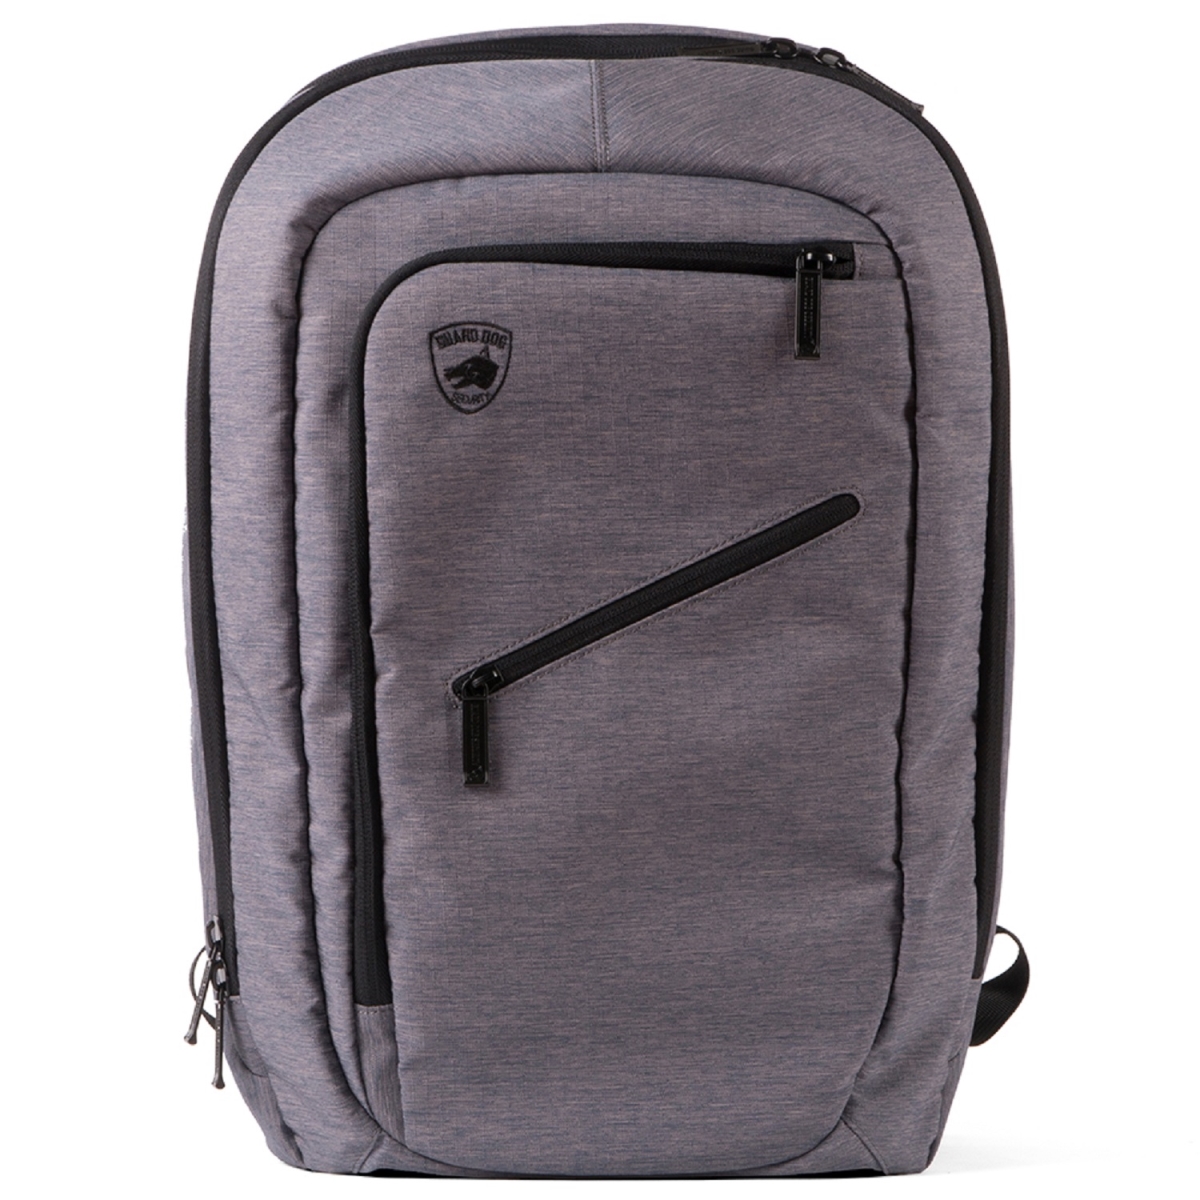 1108811 Bullet Proof Backpack With Charging Bank, Gray